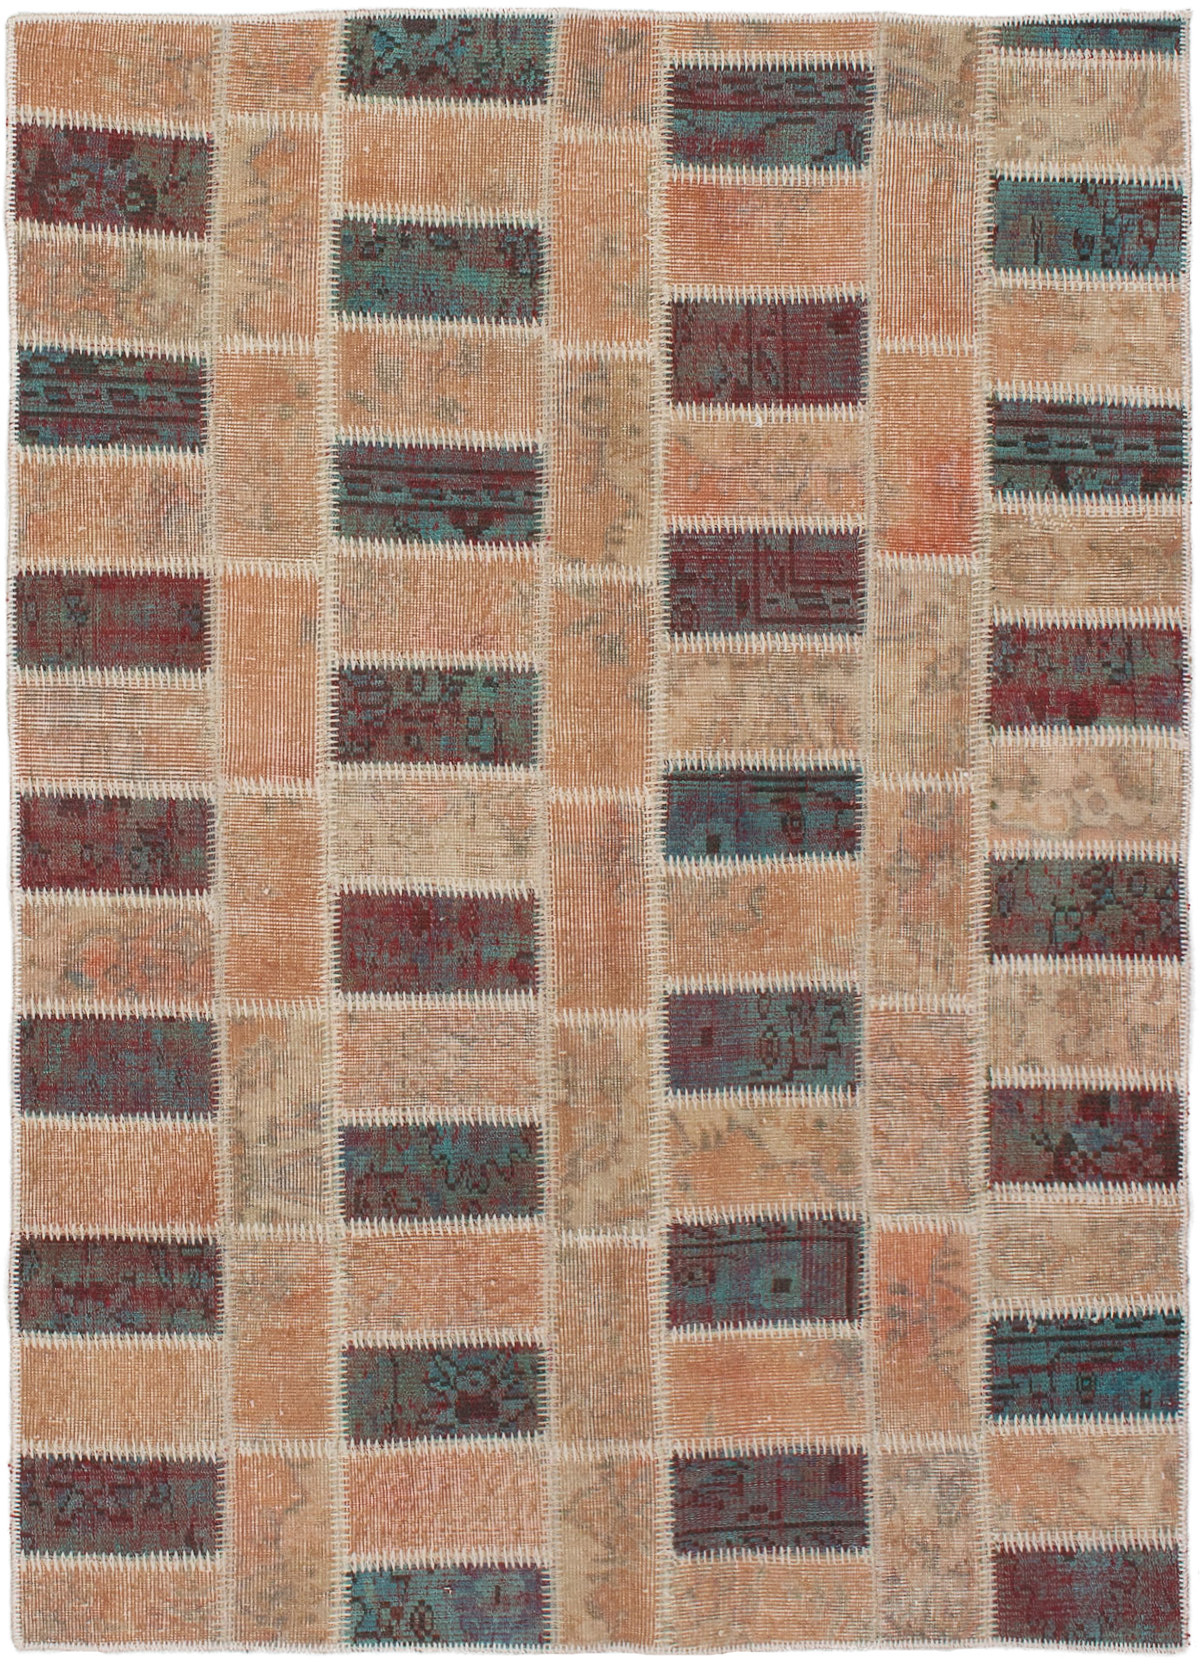 Hand-knotted Color Transition Patch Salmon Wool Rug 4'7" x 6'5" Size: 4'7" x 6'5"  